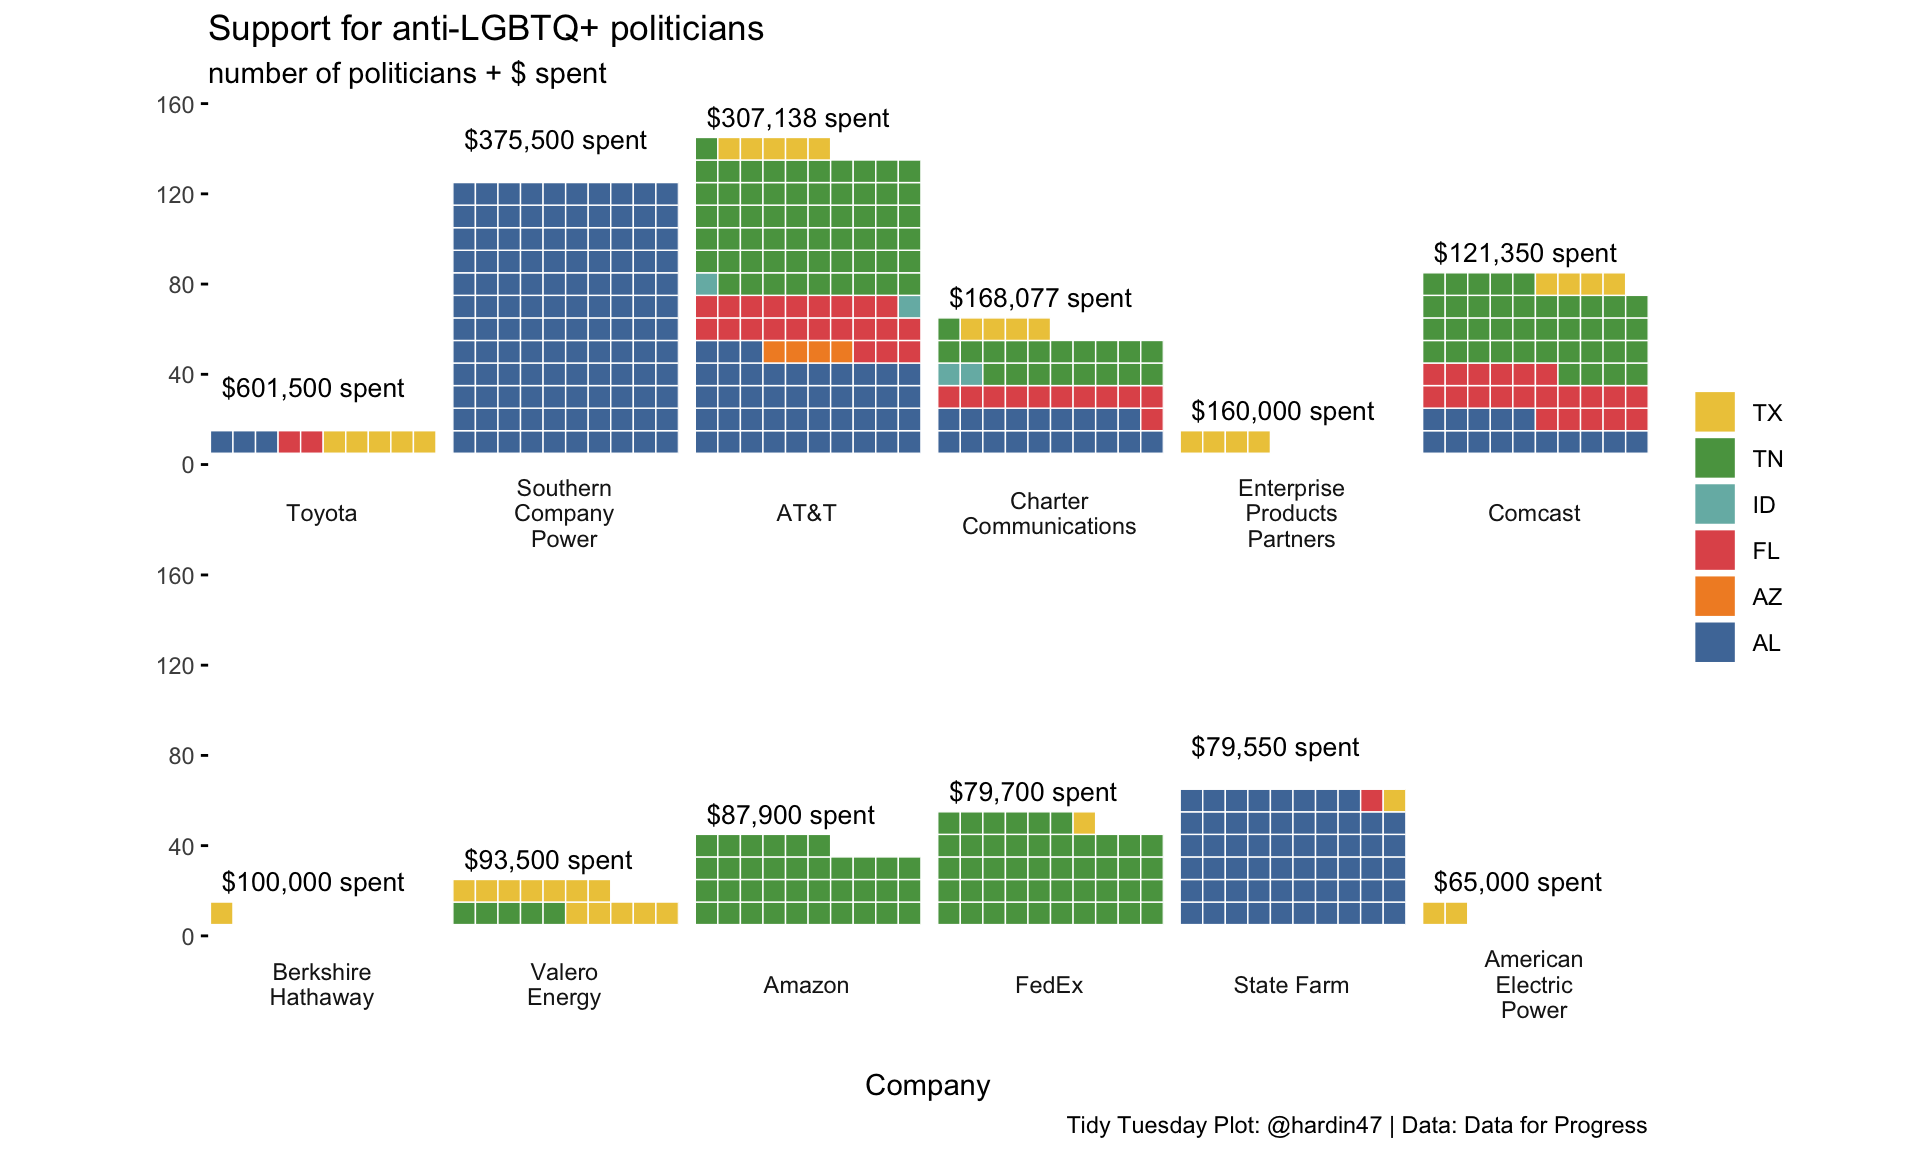 Faceted waffle bar chart describing the number of politicians and total donations for each company giving to an anti-LGBTQ+ politician.  The waffle squares are colored by which state the politician is from.